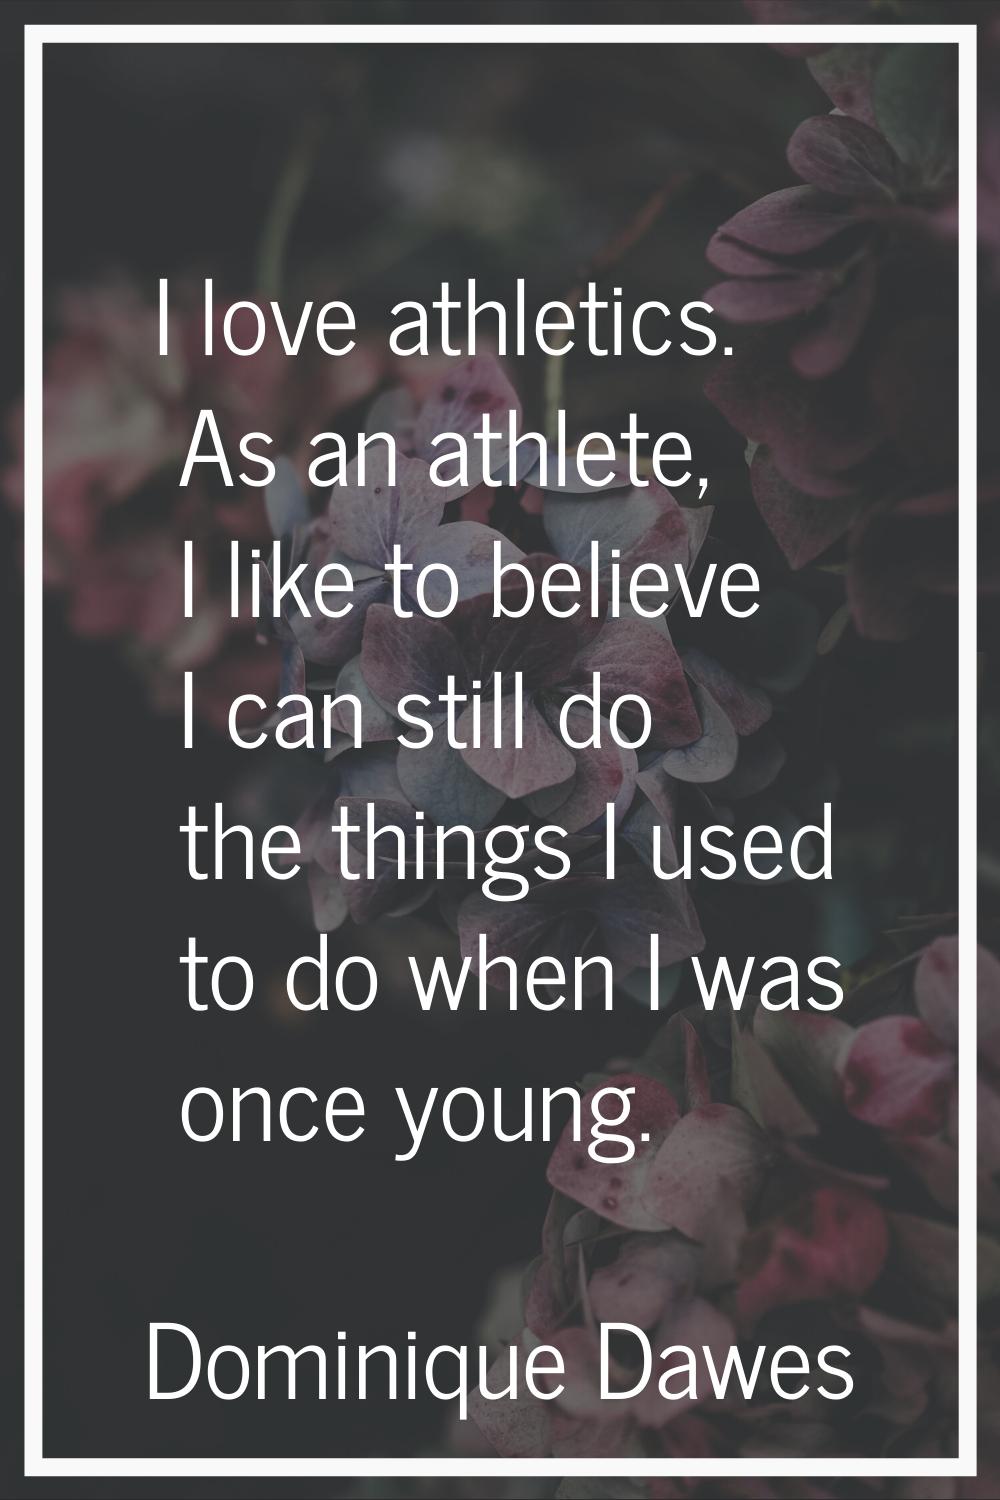 I love athletics. As an athlete, I like to believe I can still do the things I used to do when I wa